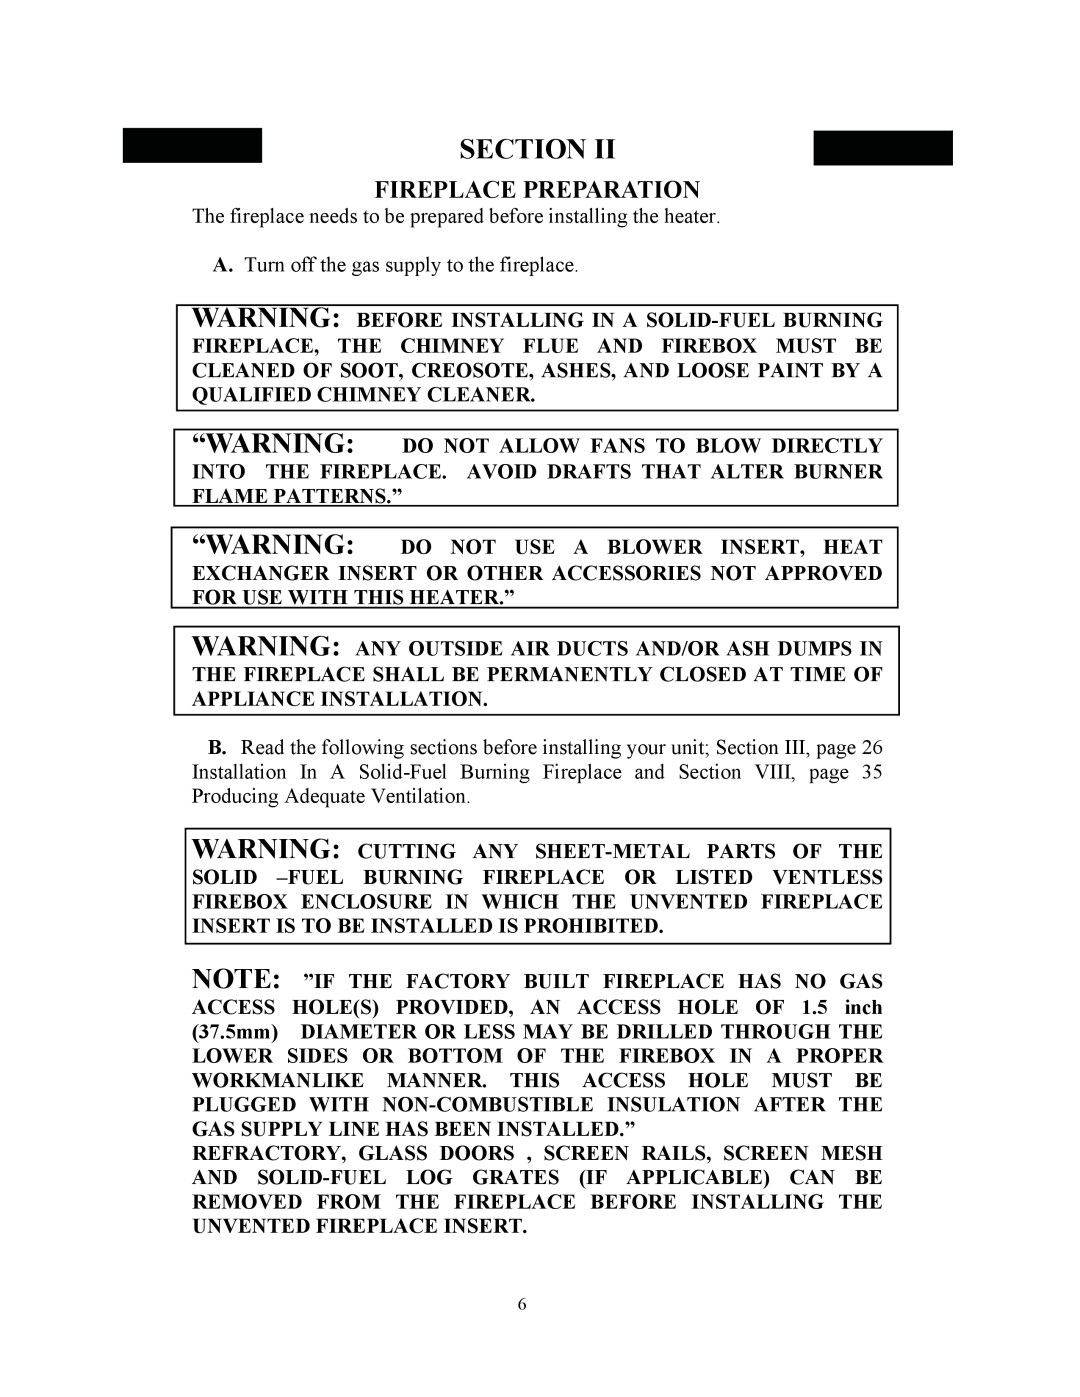 New Buck Corporation 34 manual Section, Fireplace Preparation 